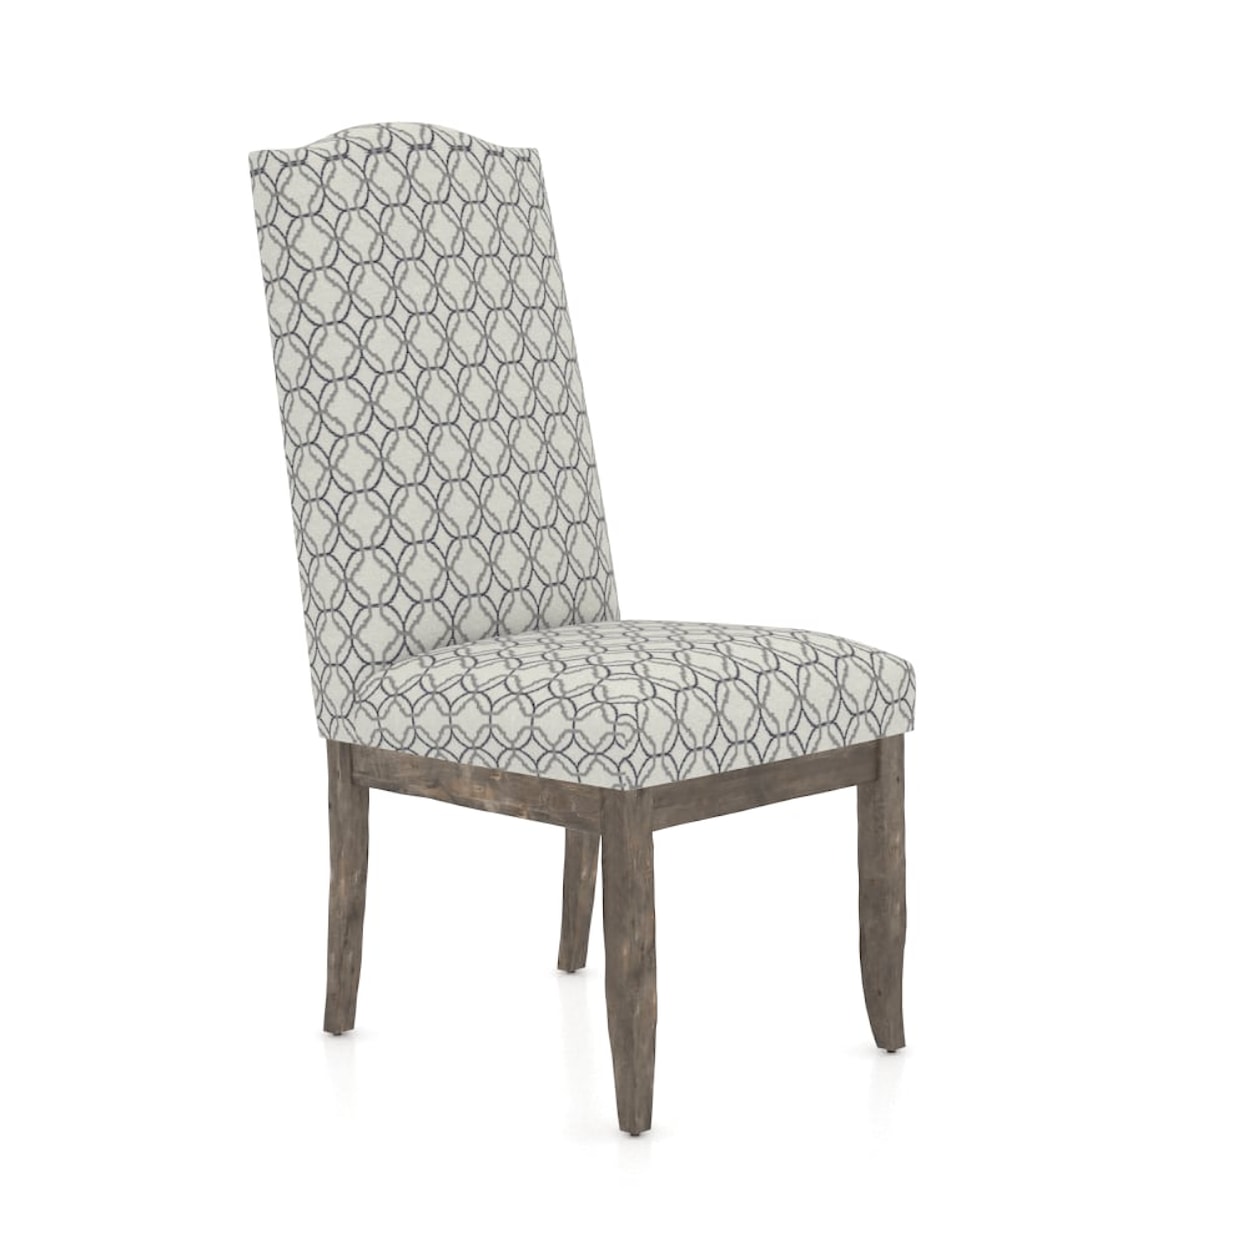 Canadel Champlain Upholstered chair